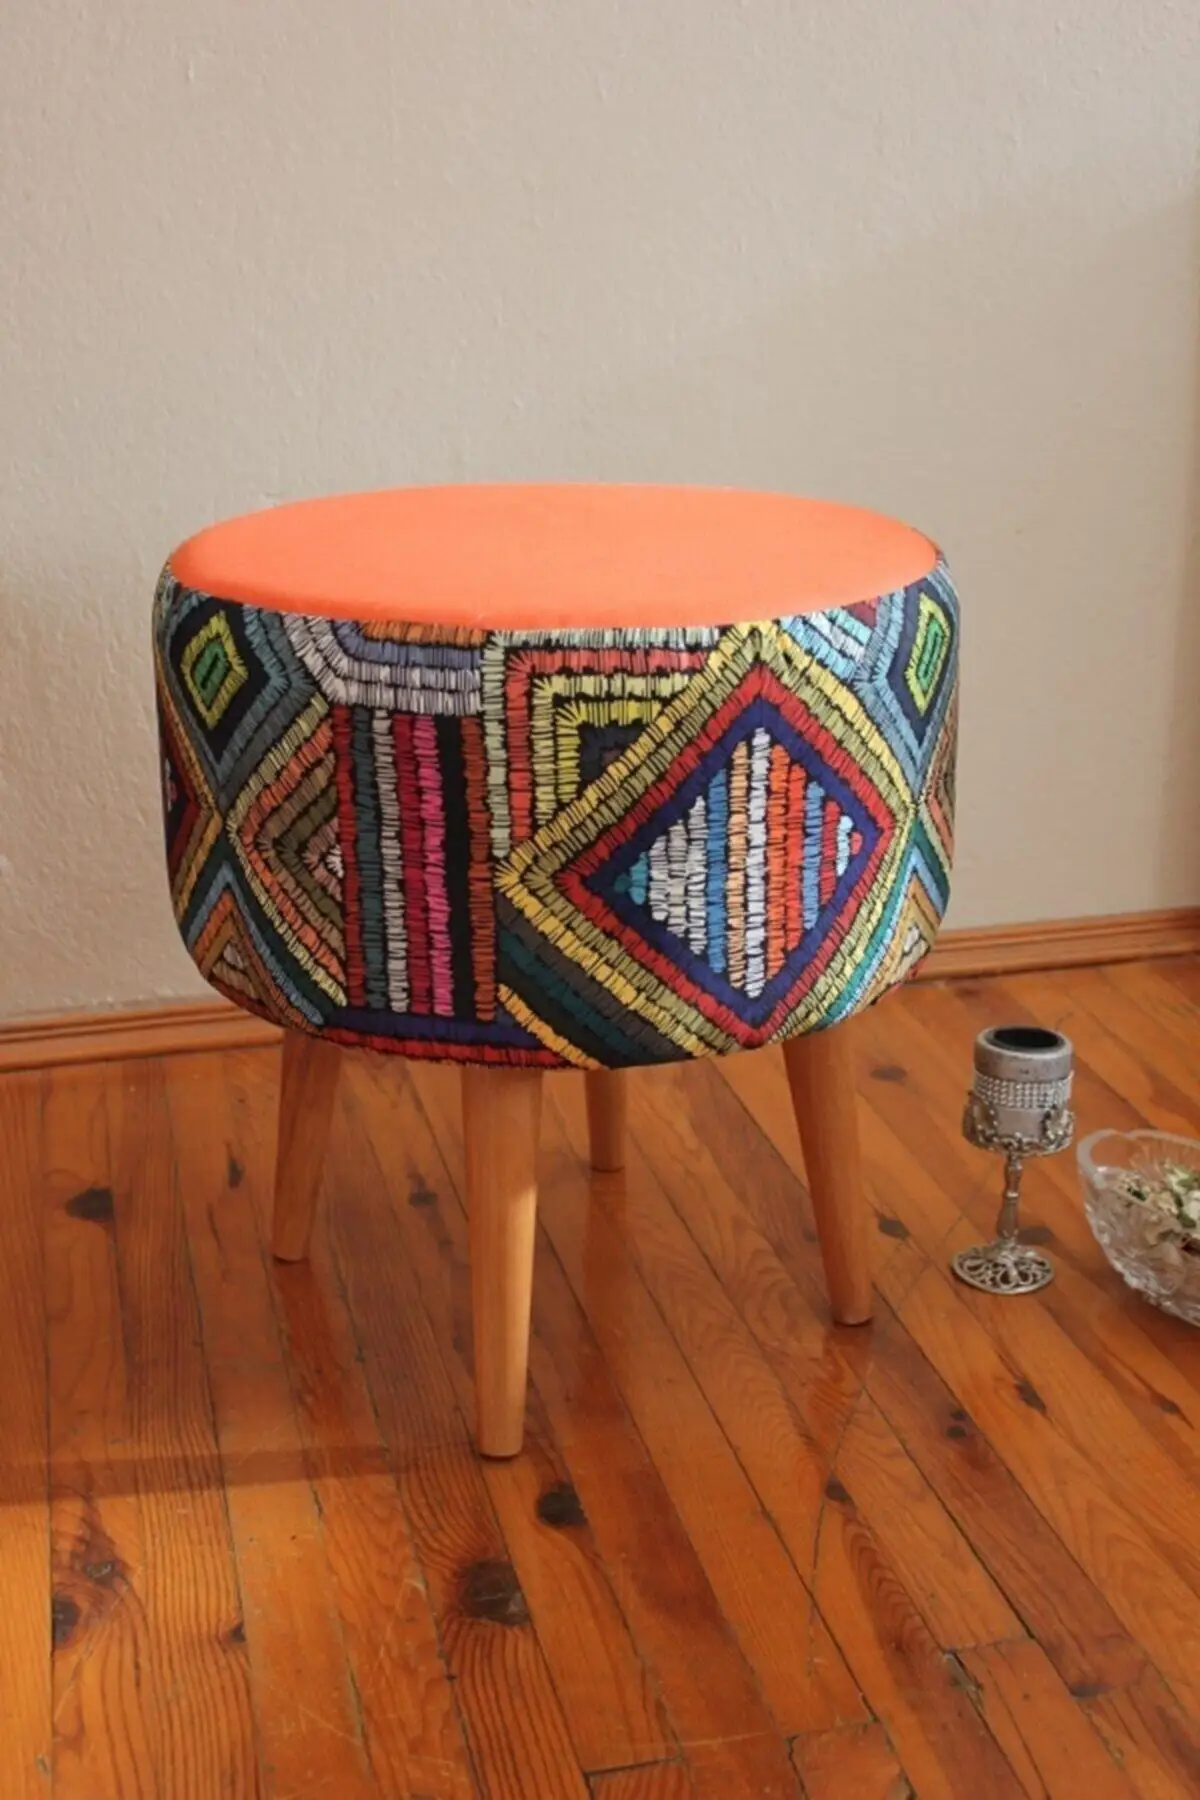 

Beech Retro Wood Legs Decorative Ethnic Top Tile Pattern Cylindrical Puff Bench Seat Chair